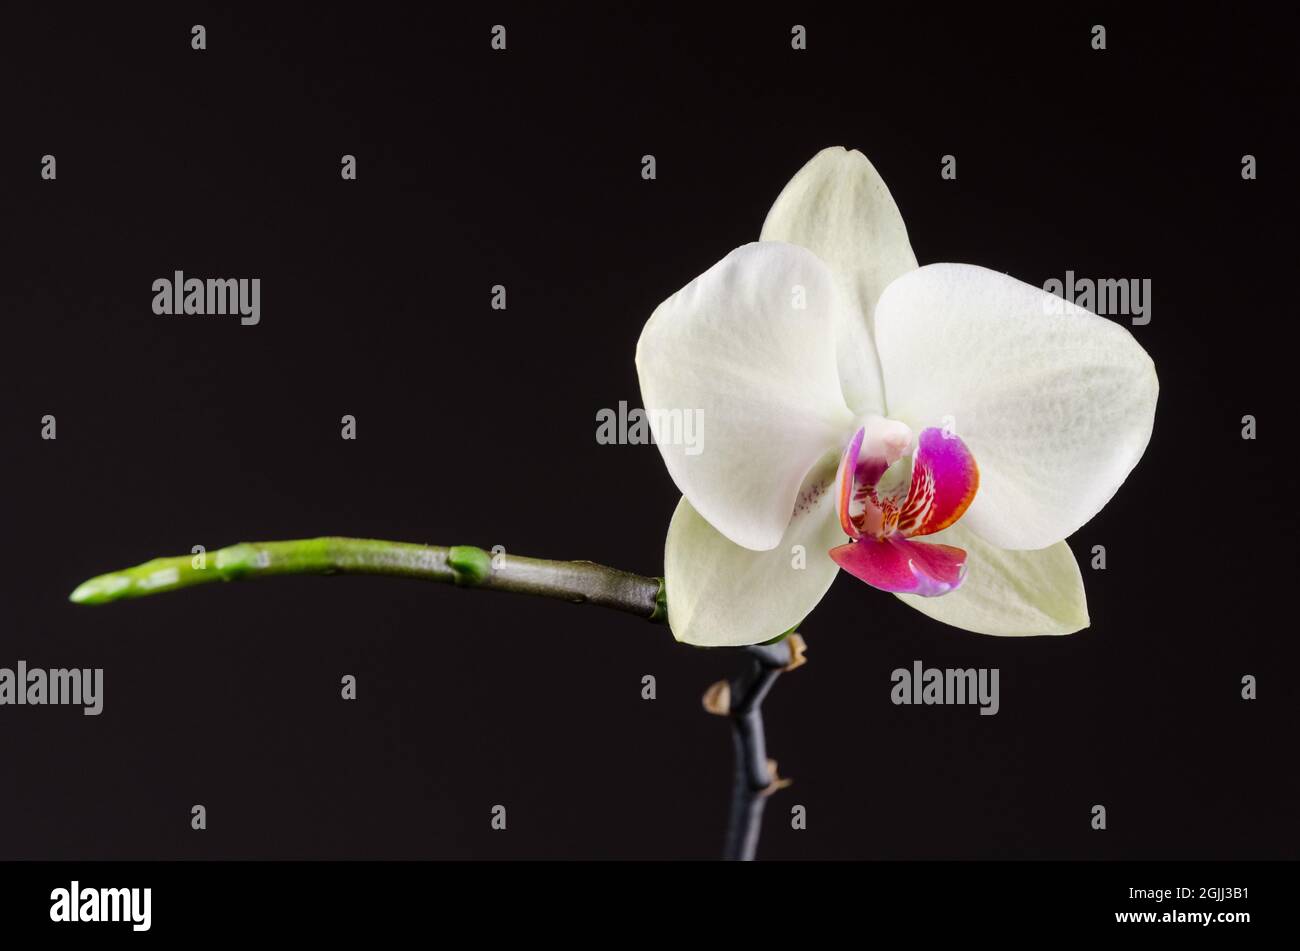 Orchidaceae, still life of white orchid flowers against dark background, minimalistic fine art wallpaper Stock Photo